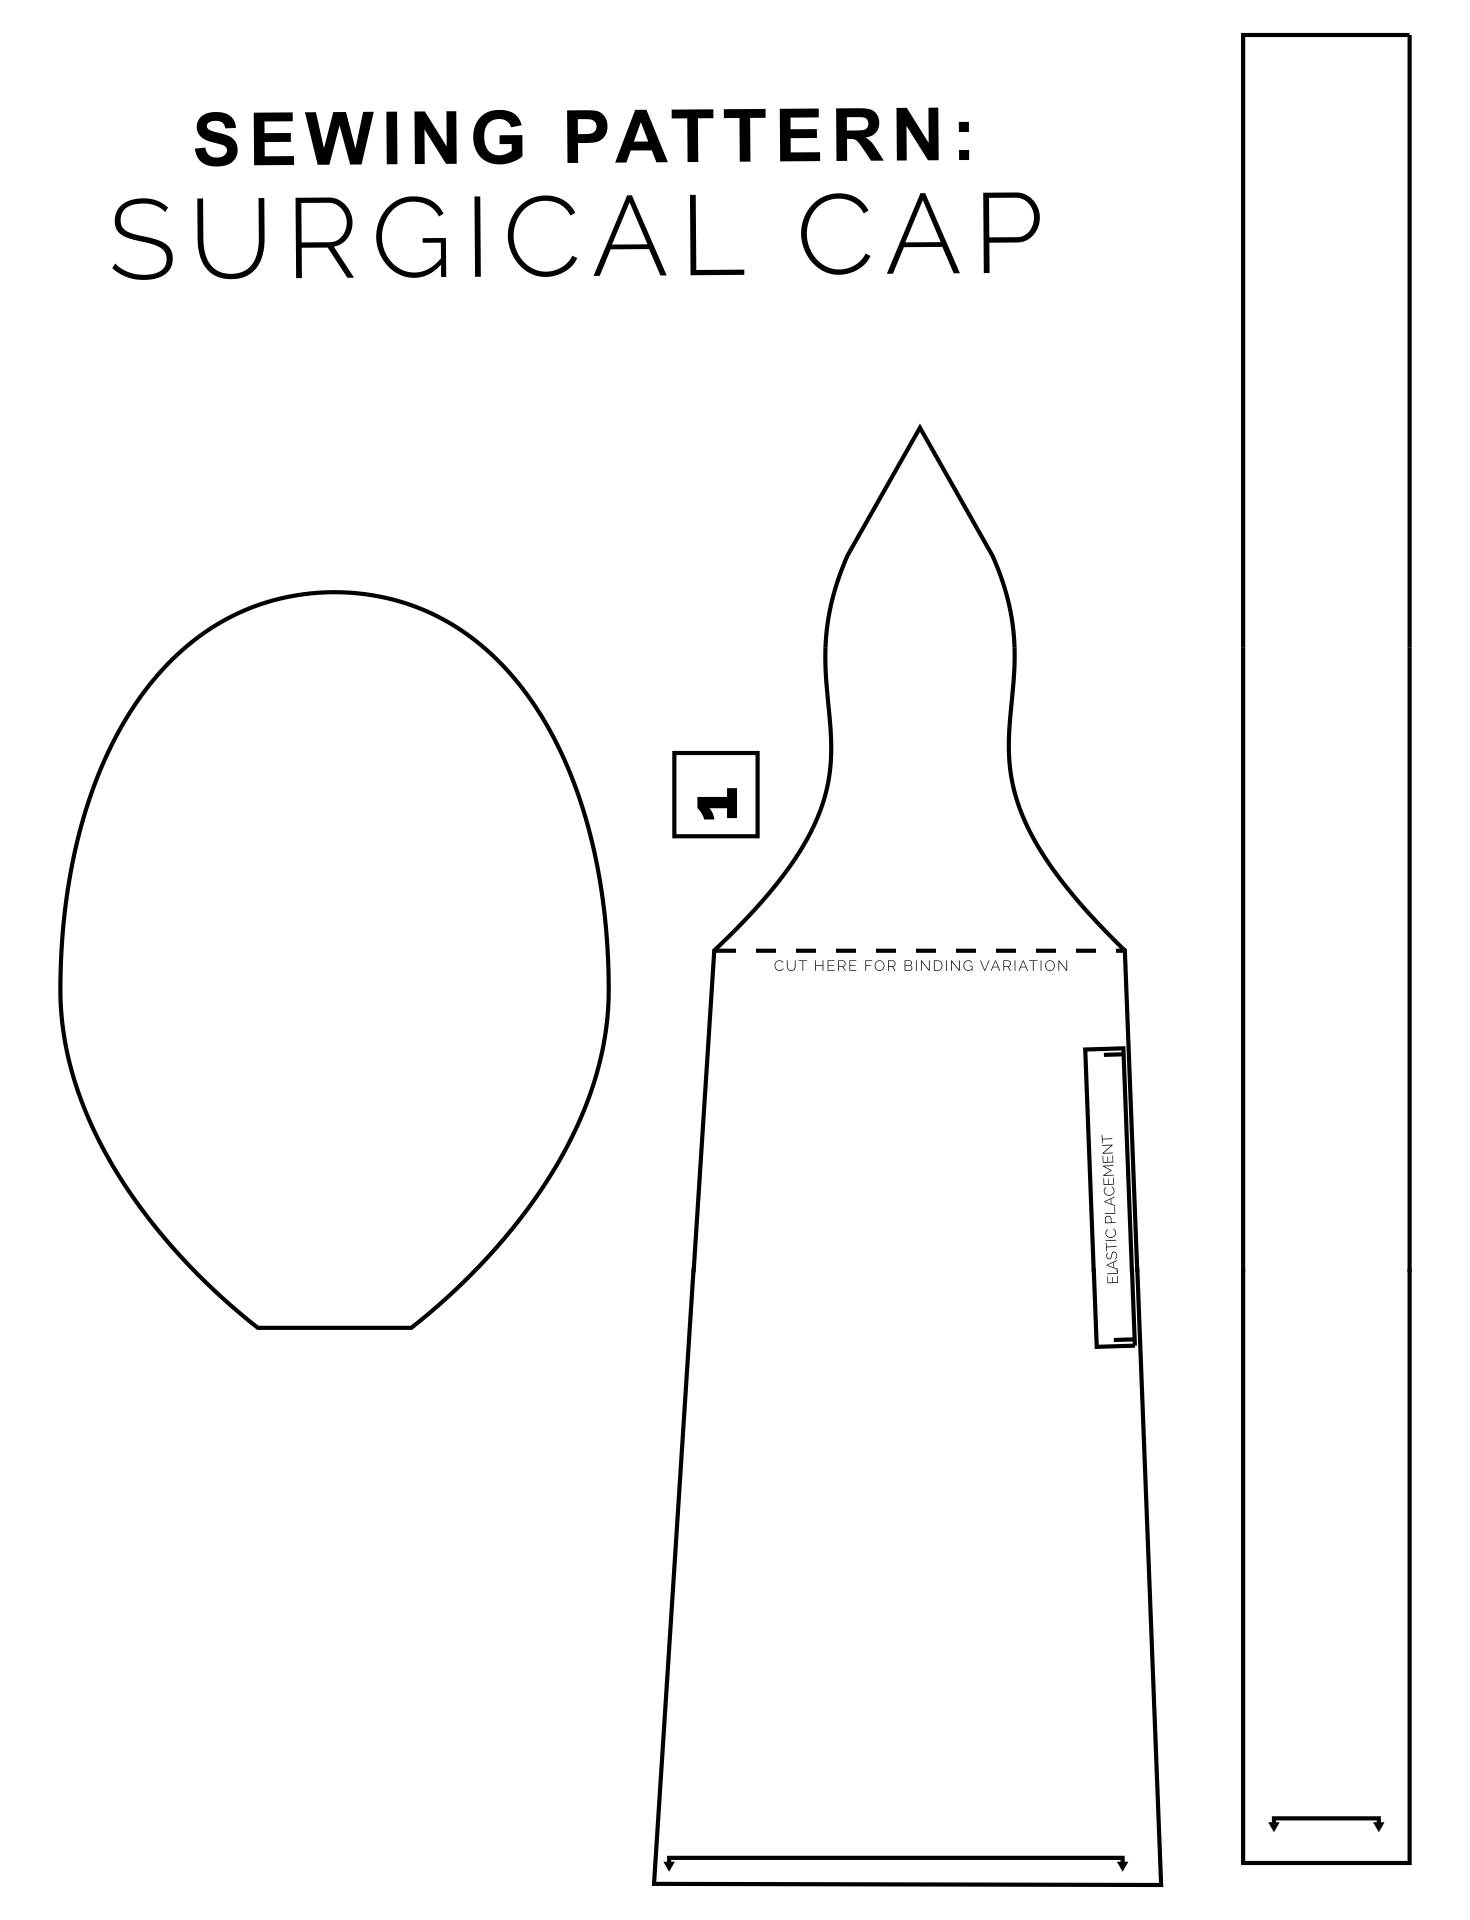 34-surgical-cap-sewing-pattern-free-margauxarkady